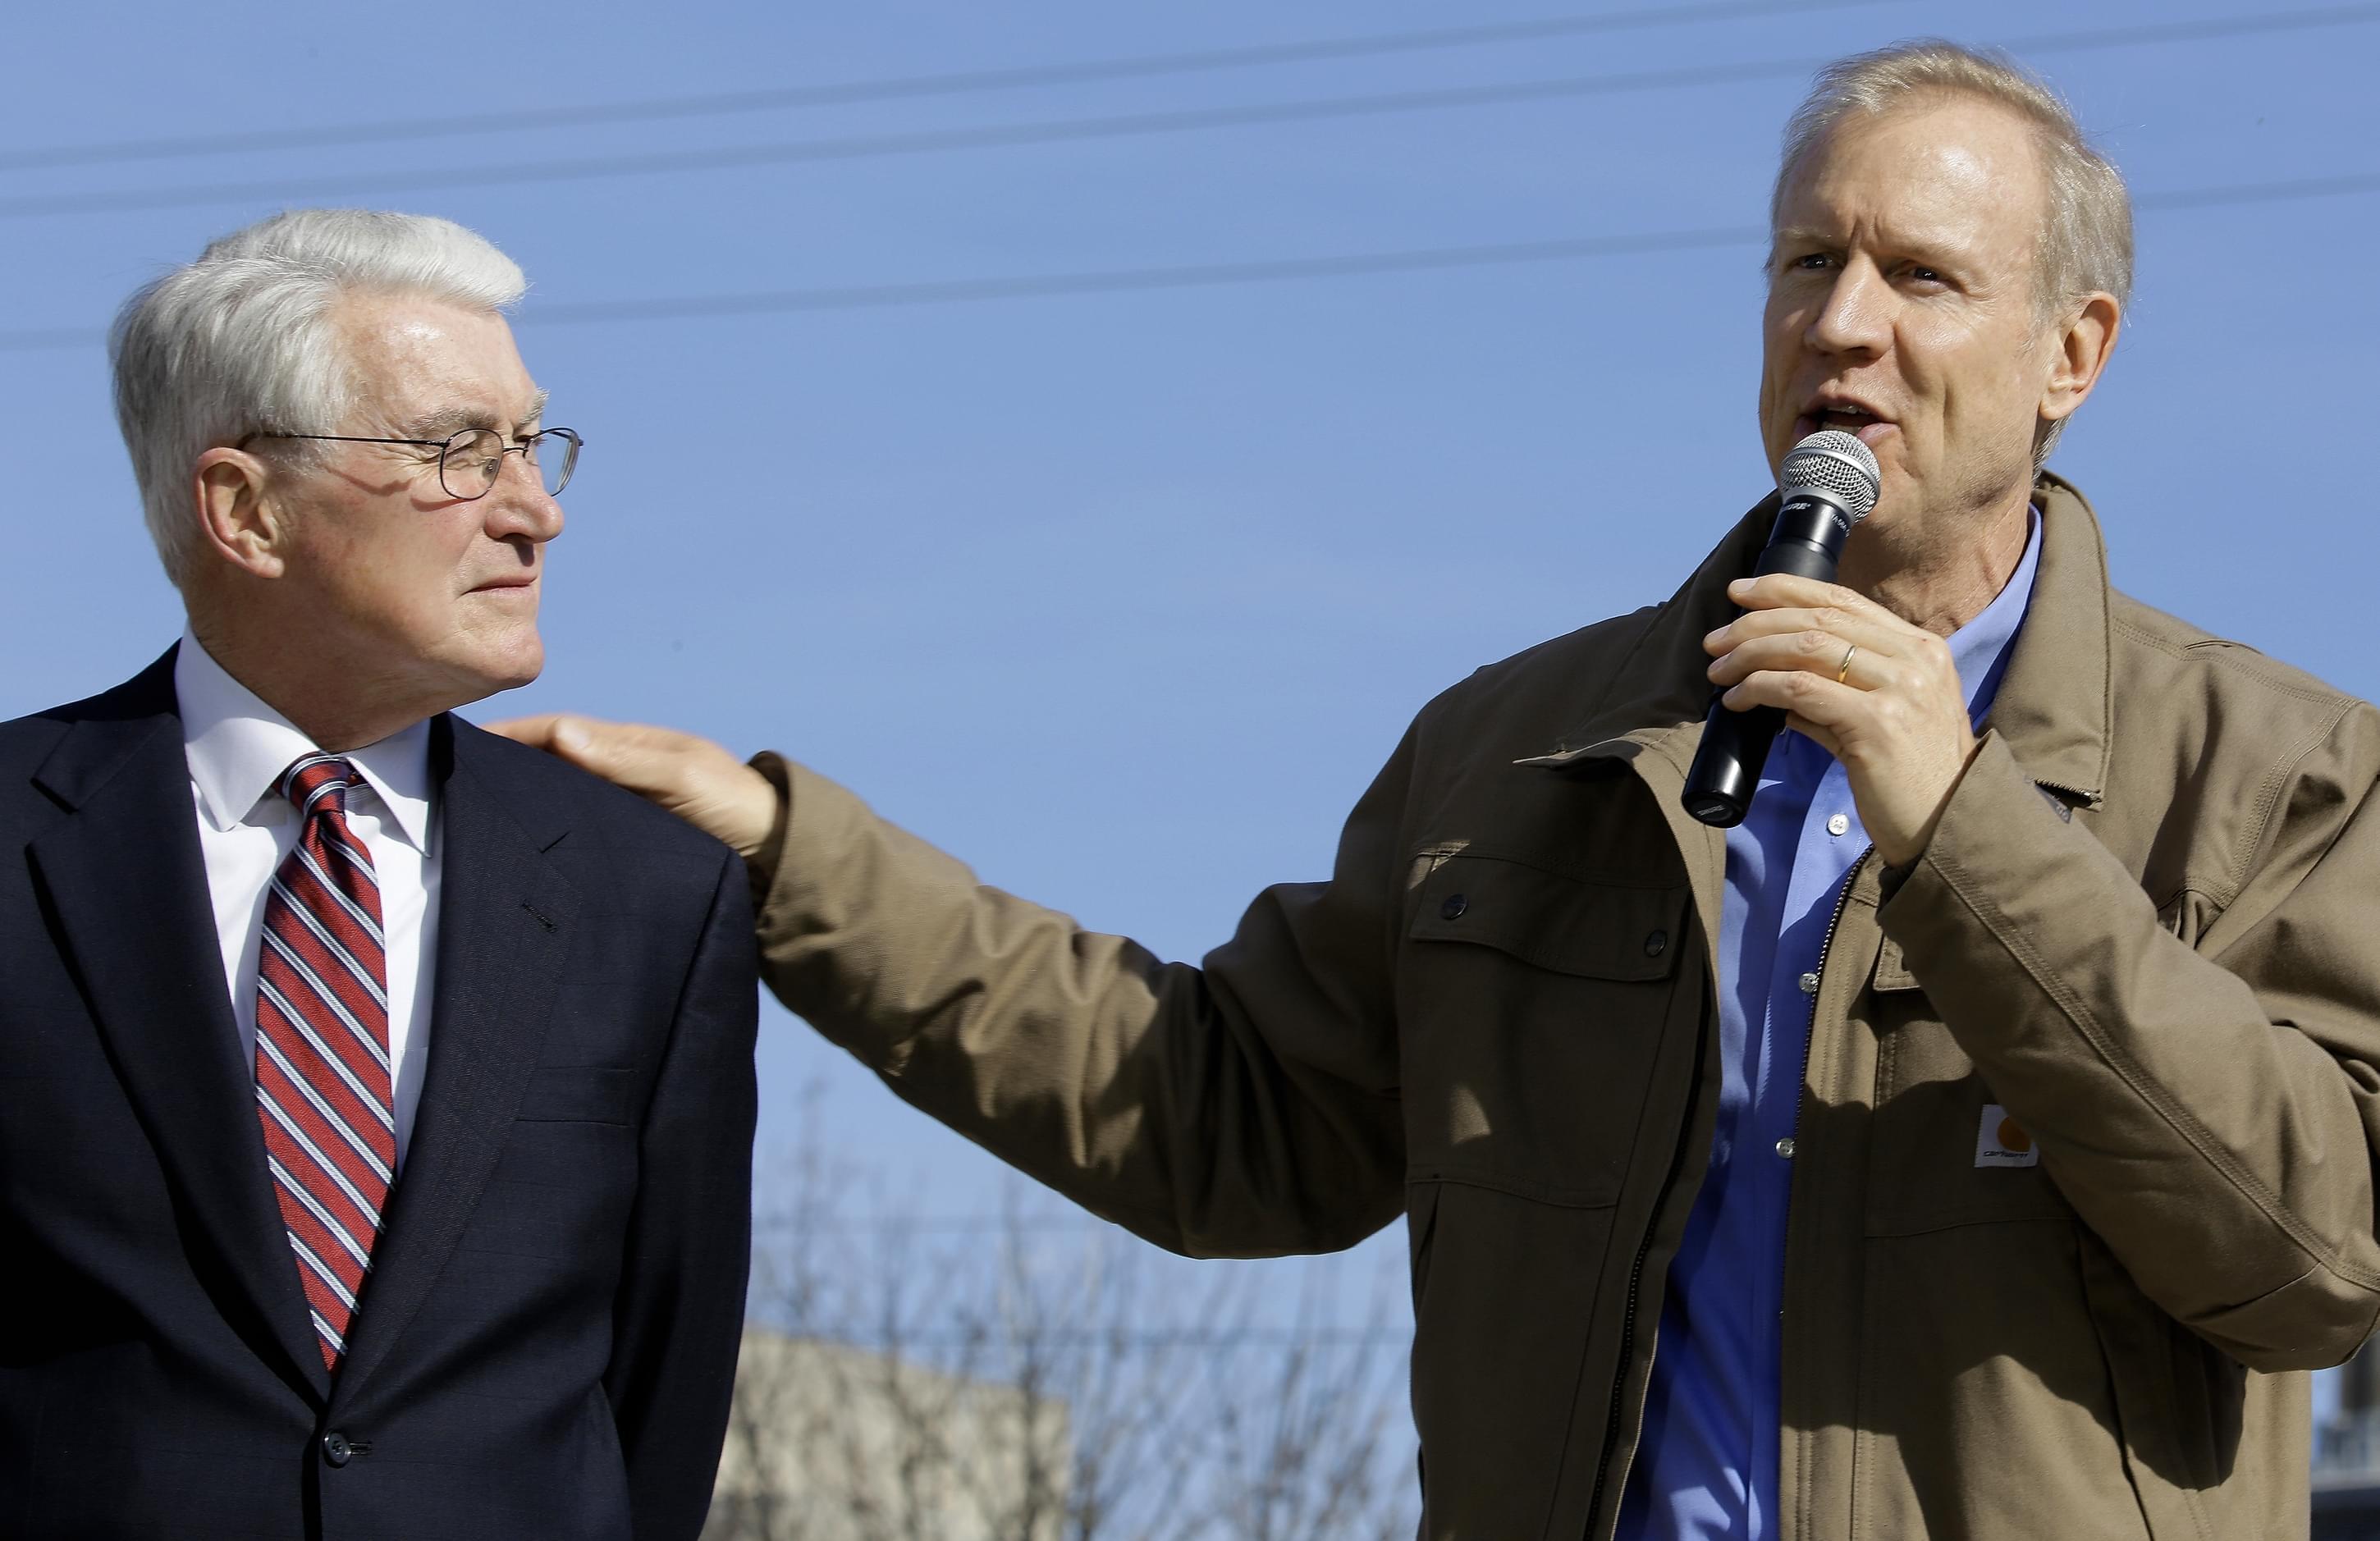 In this Nov. 3, 2014 file photo, former Governor of Illinois Jim Edgar, left, shows his support of Republican gubernatorial candidate Bruce Rauner, right, during a campaign rally in Springfield. Edgar, who ran the state from 1991 to 1999, is pressing